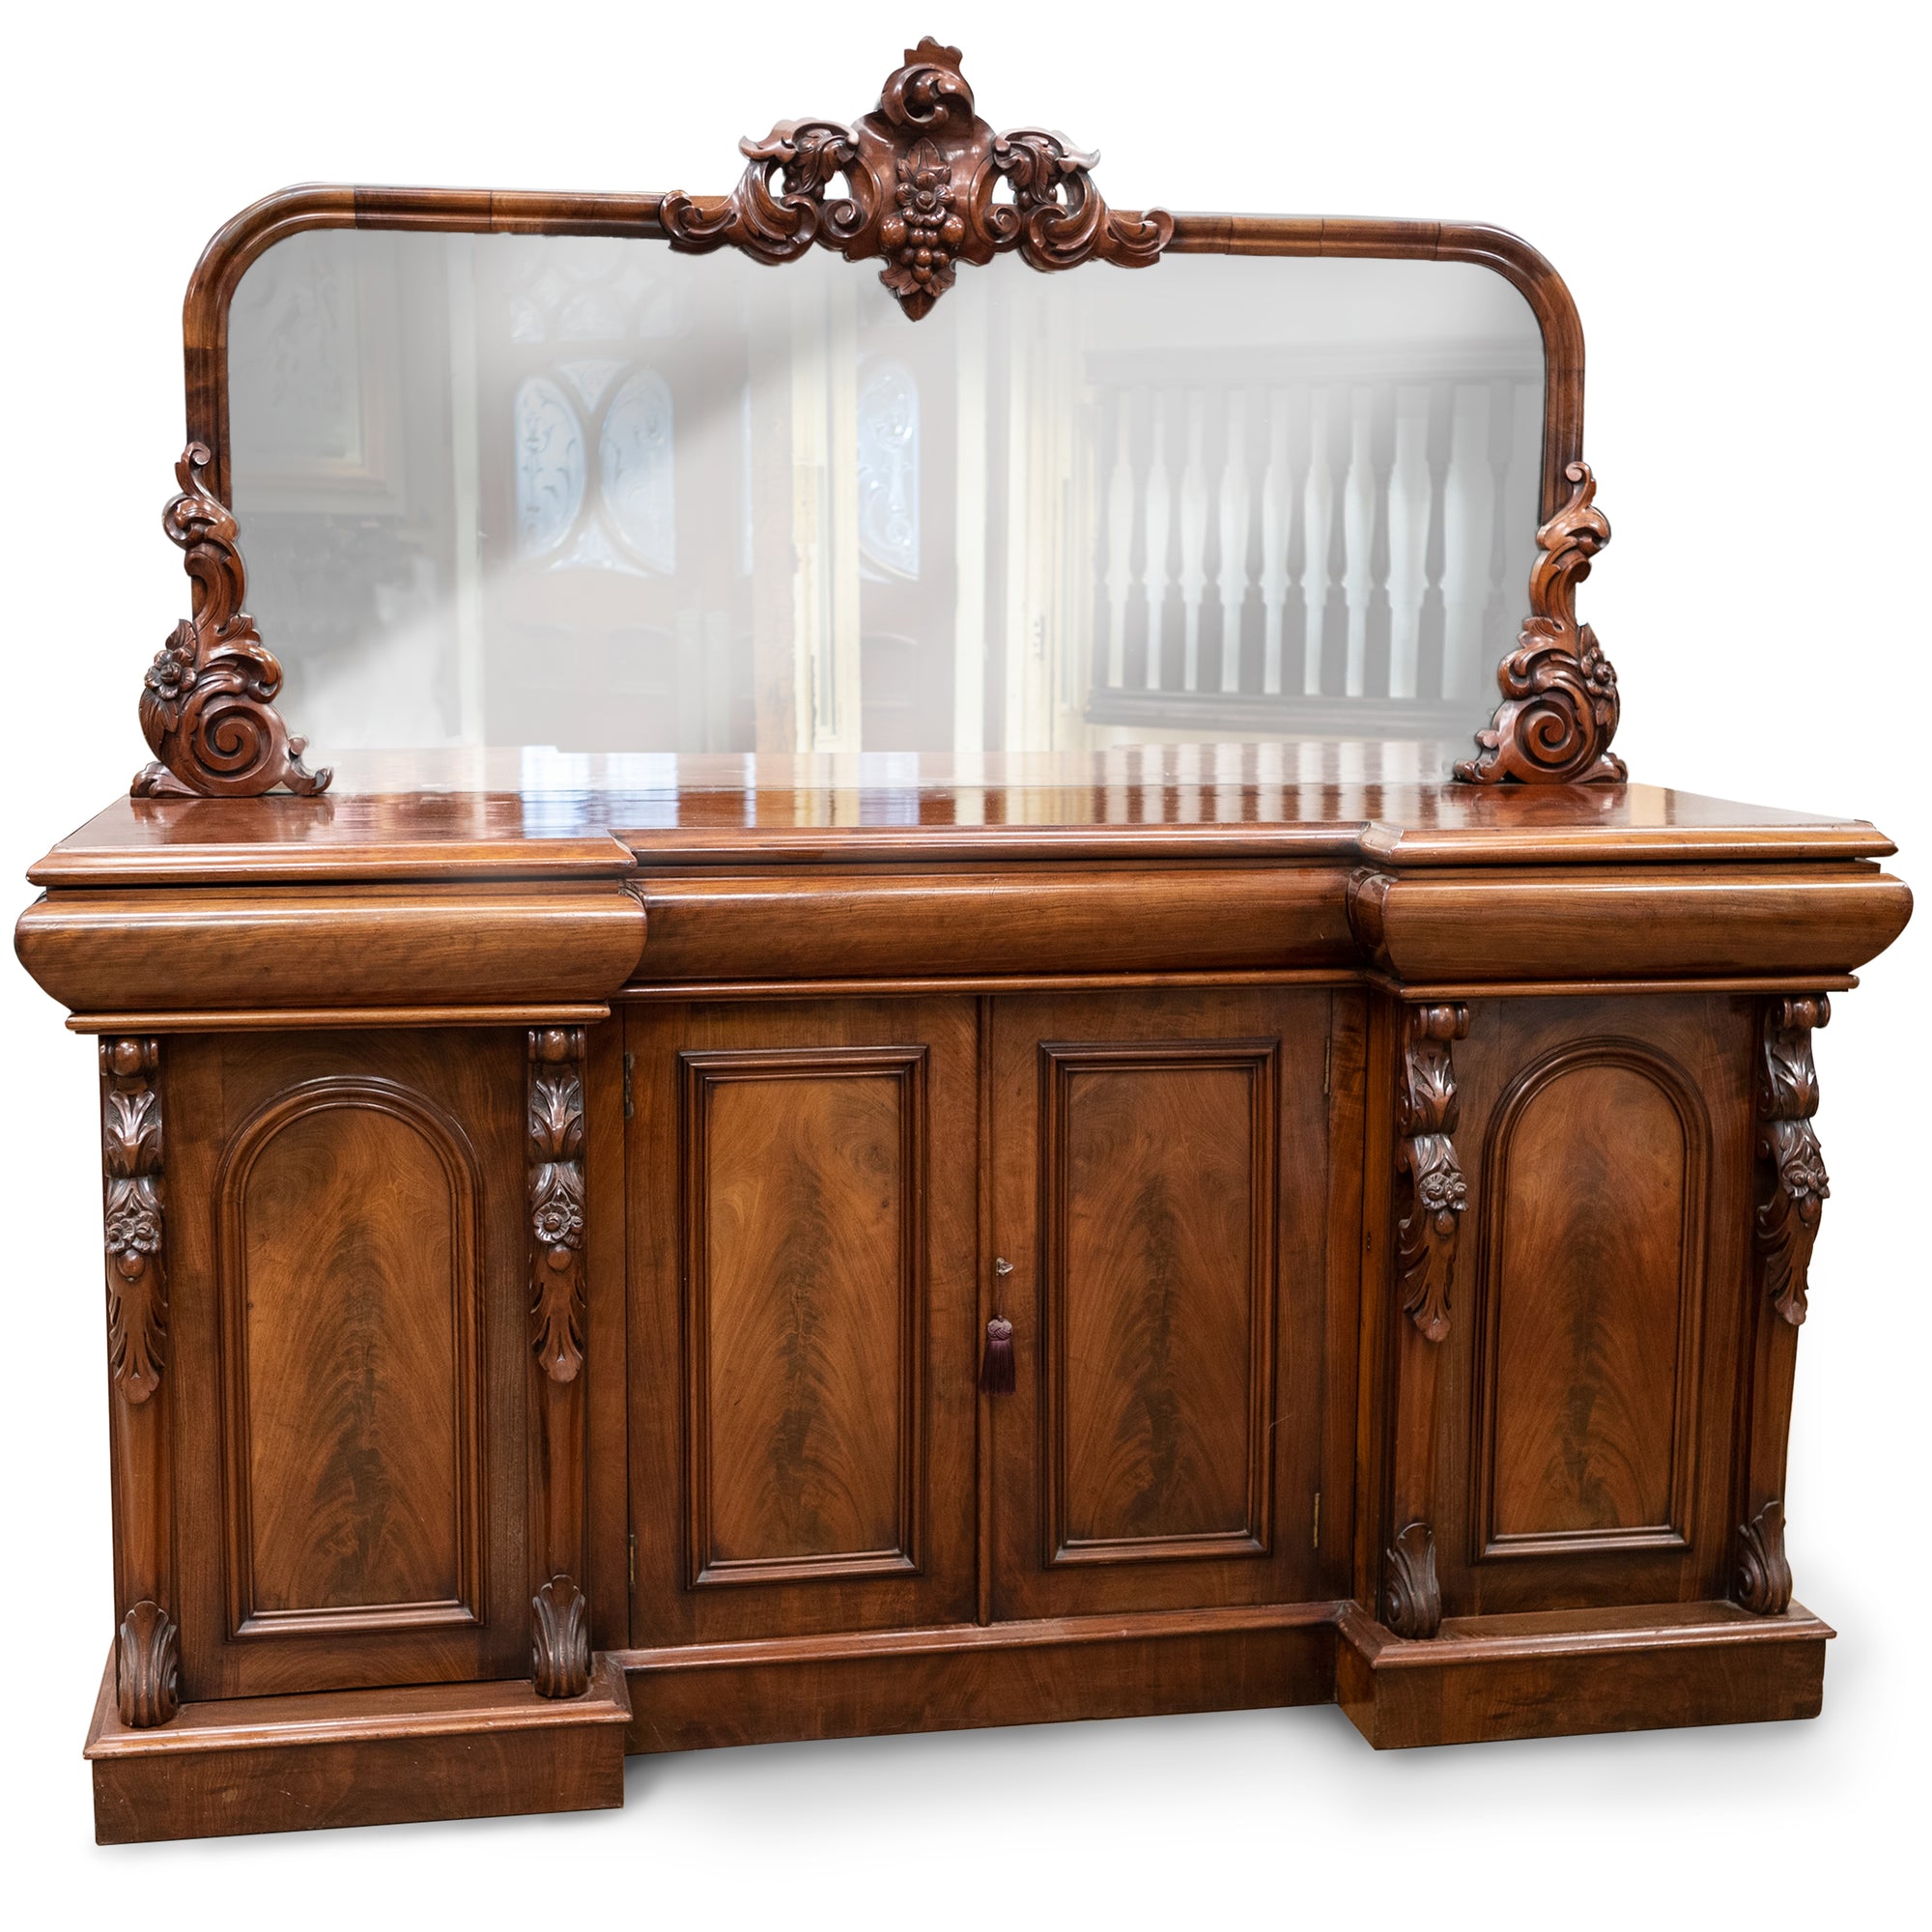 Antique Ornate Carved Mahogany Sideboard with Mirror and Secret Drawers | The Architectural Forum